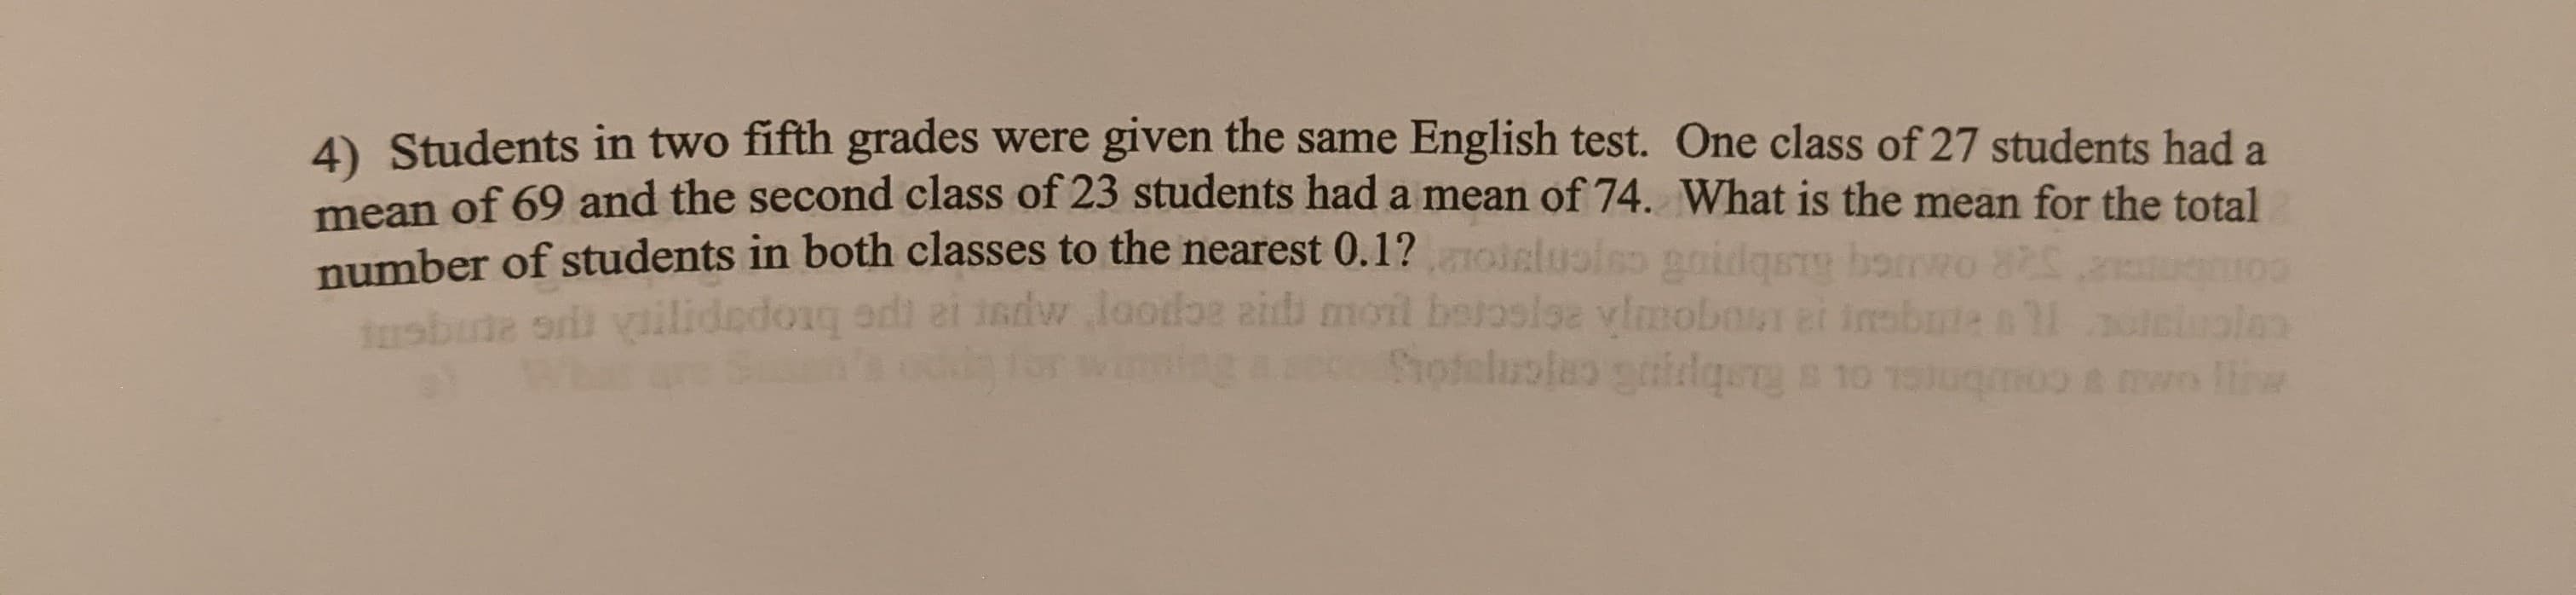 4) Students in two fifth grades were given the same English test. One class of 27 students had a
mean of 69 and the second class of 23 students had a mean of 74. What is the mean for the total
number of students in both classes to the nearest 0.1?oielusiso pnidgst bomro
